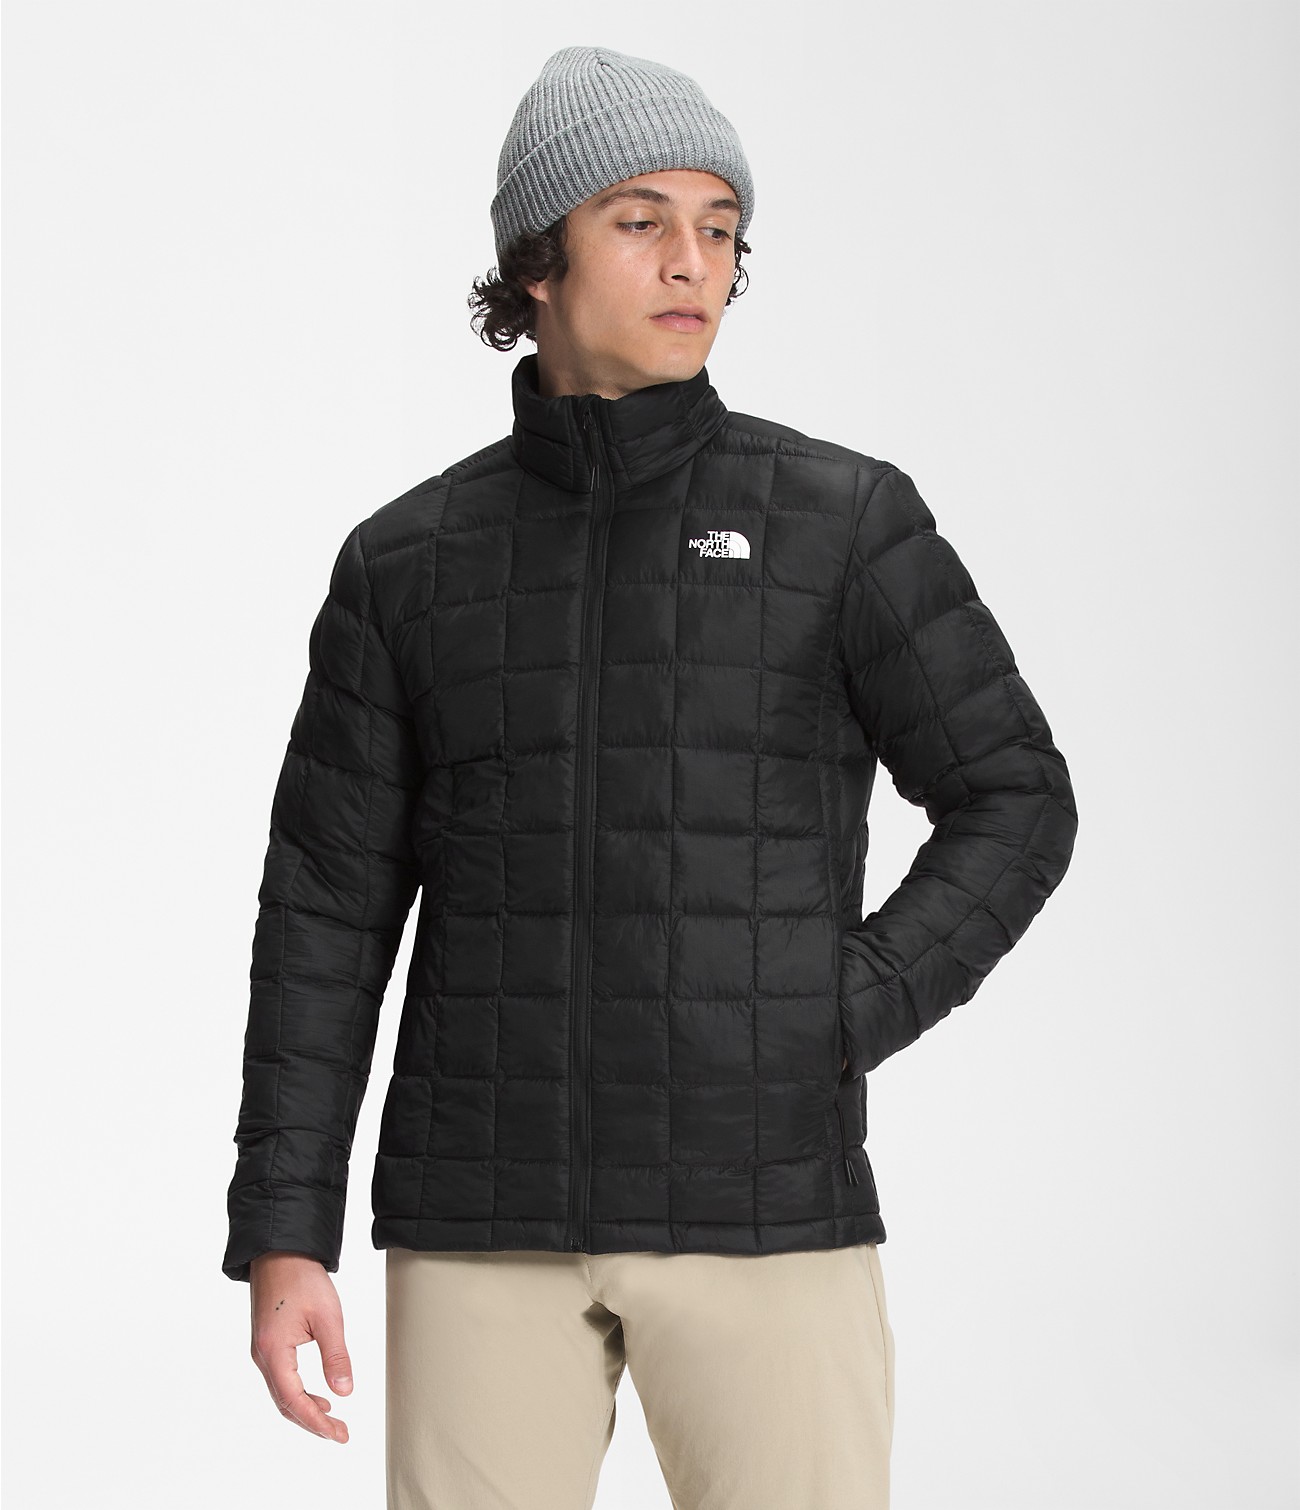 Unlock Wilderness' choice in the Eddie Bauer Vs North Face comparison, the ThermoBall™ Eco Jacket 2.0 by The North Face